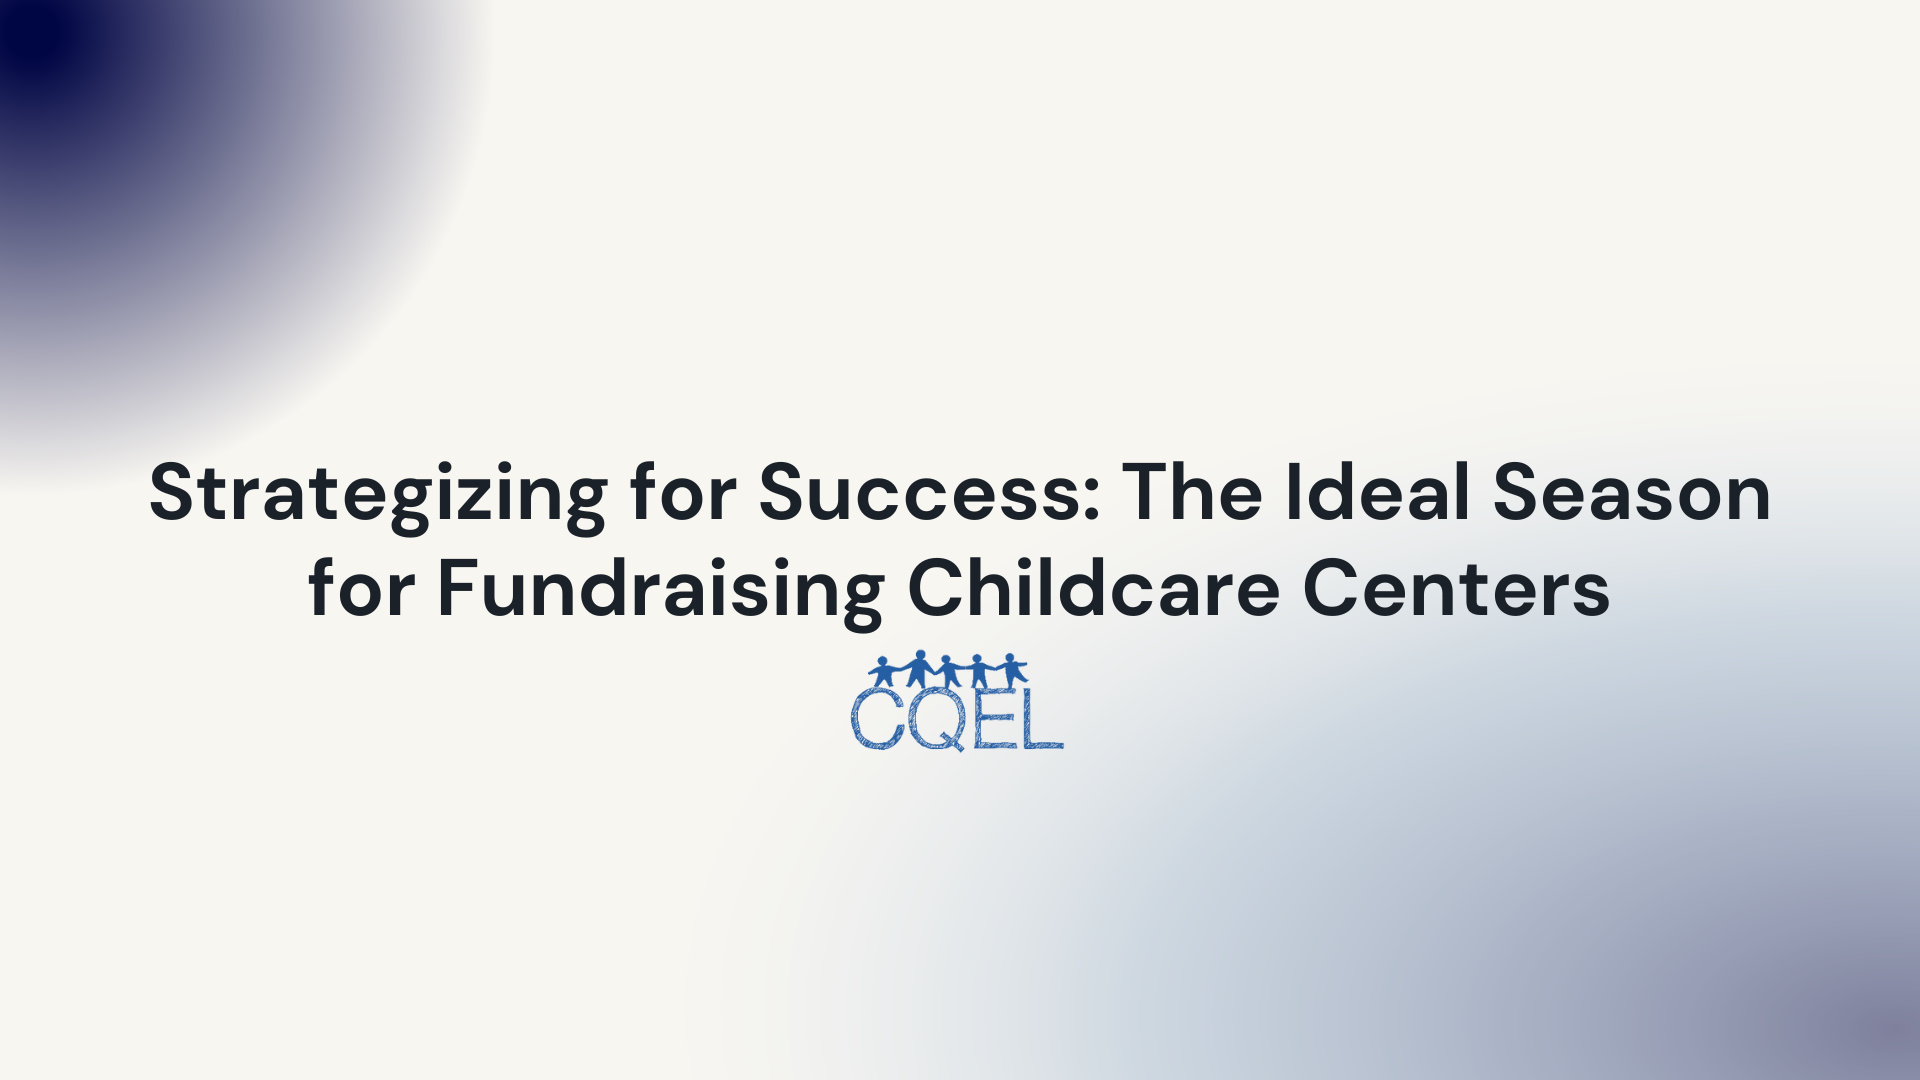 Strategizing for Success: The Ideal Season for Fundraising Childcare Centers